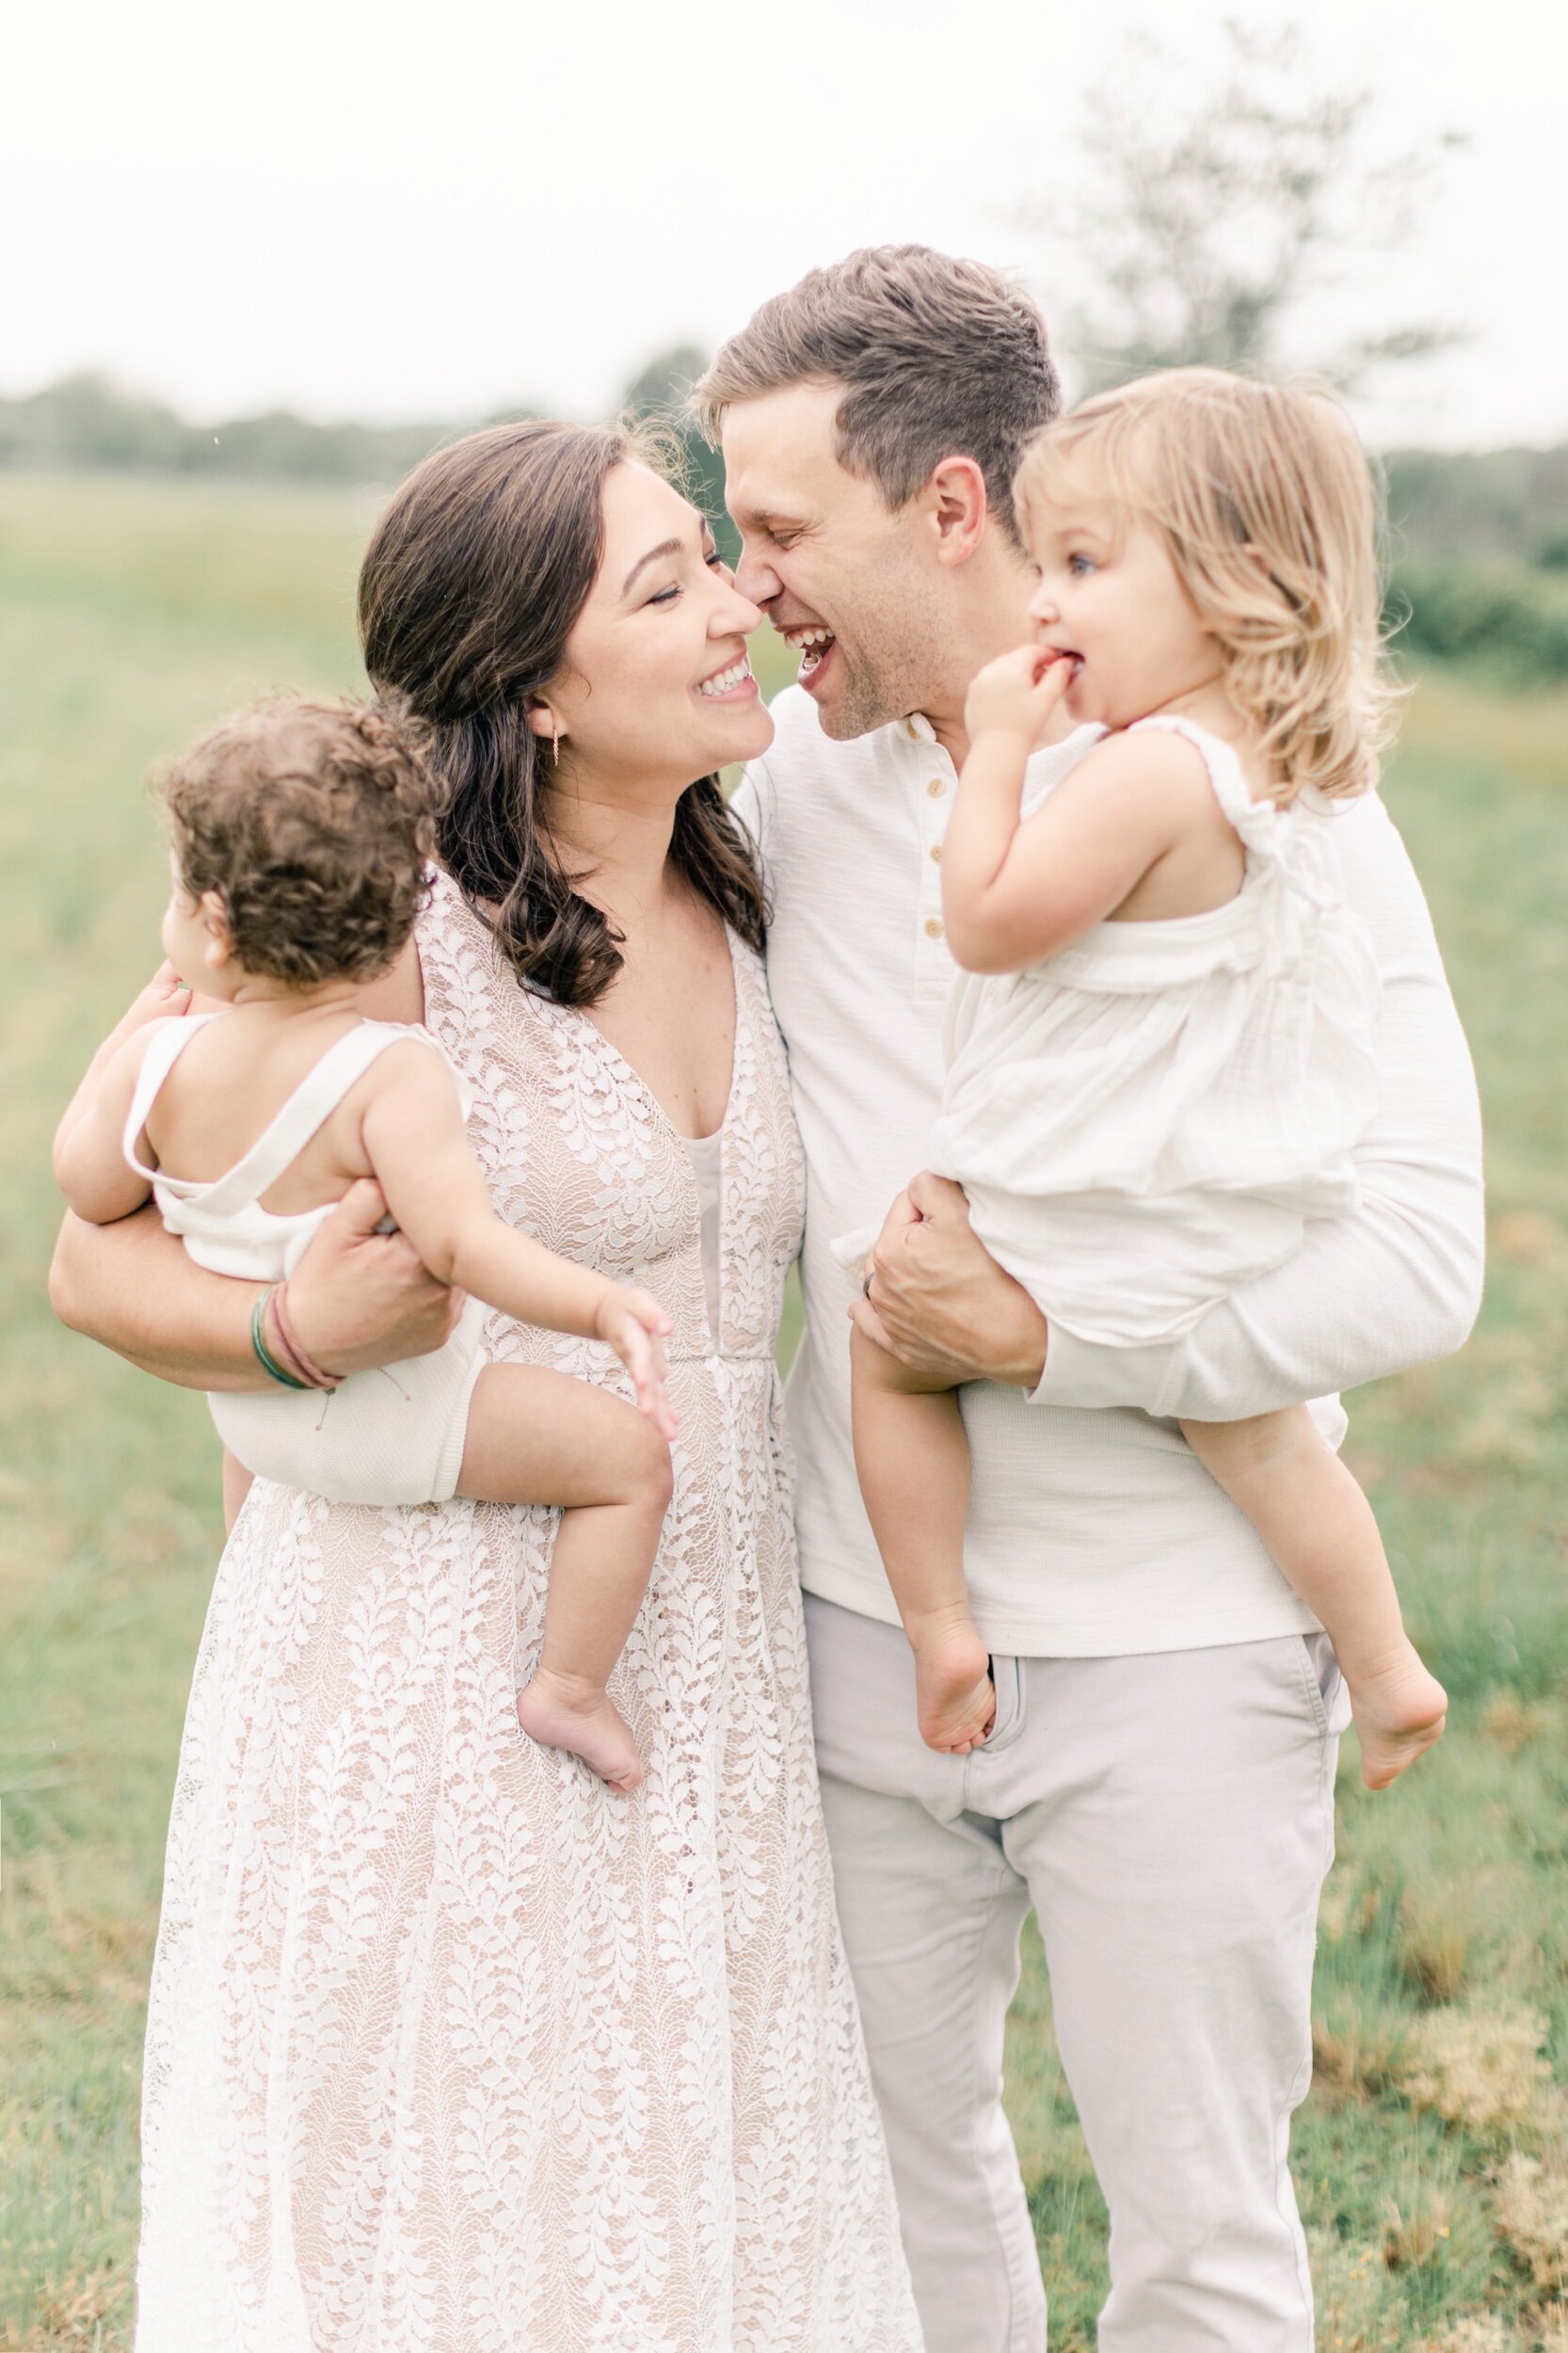 Outdoor Family Photo Session in Bentonville AR